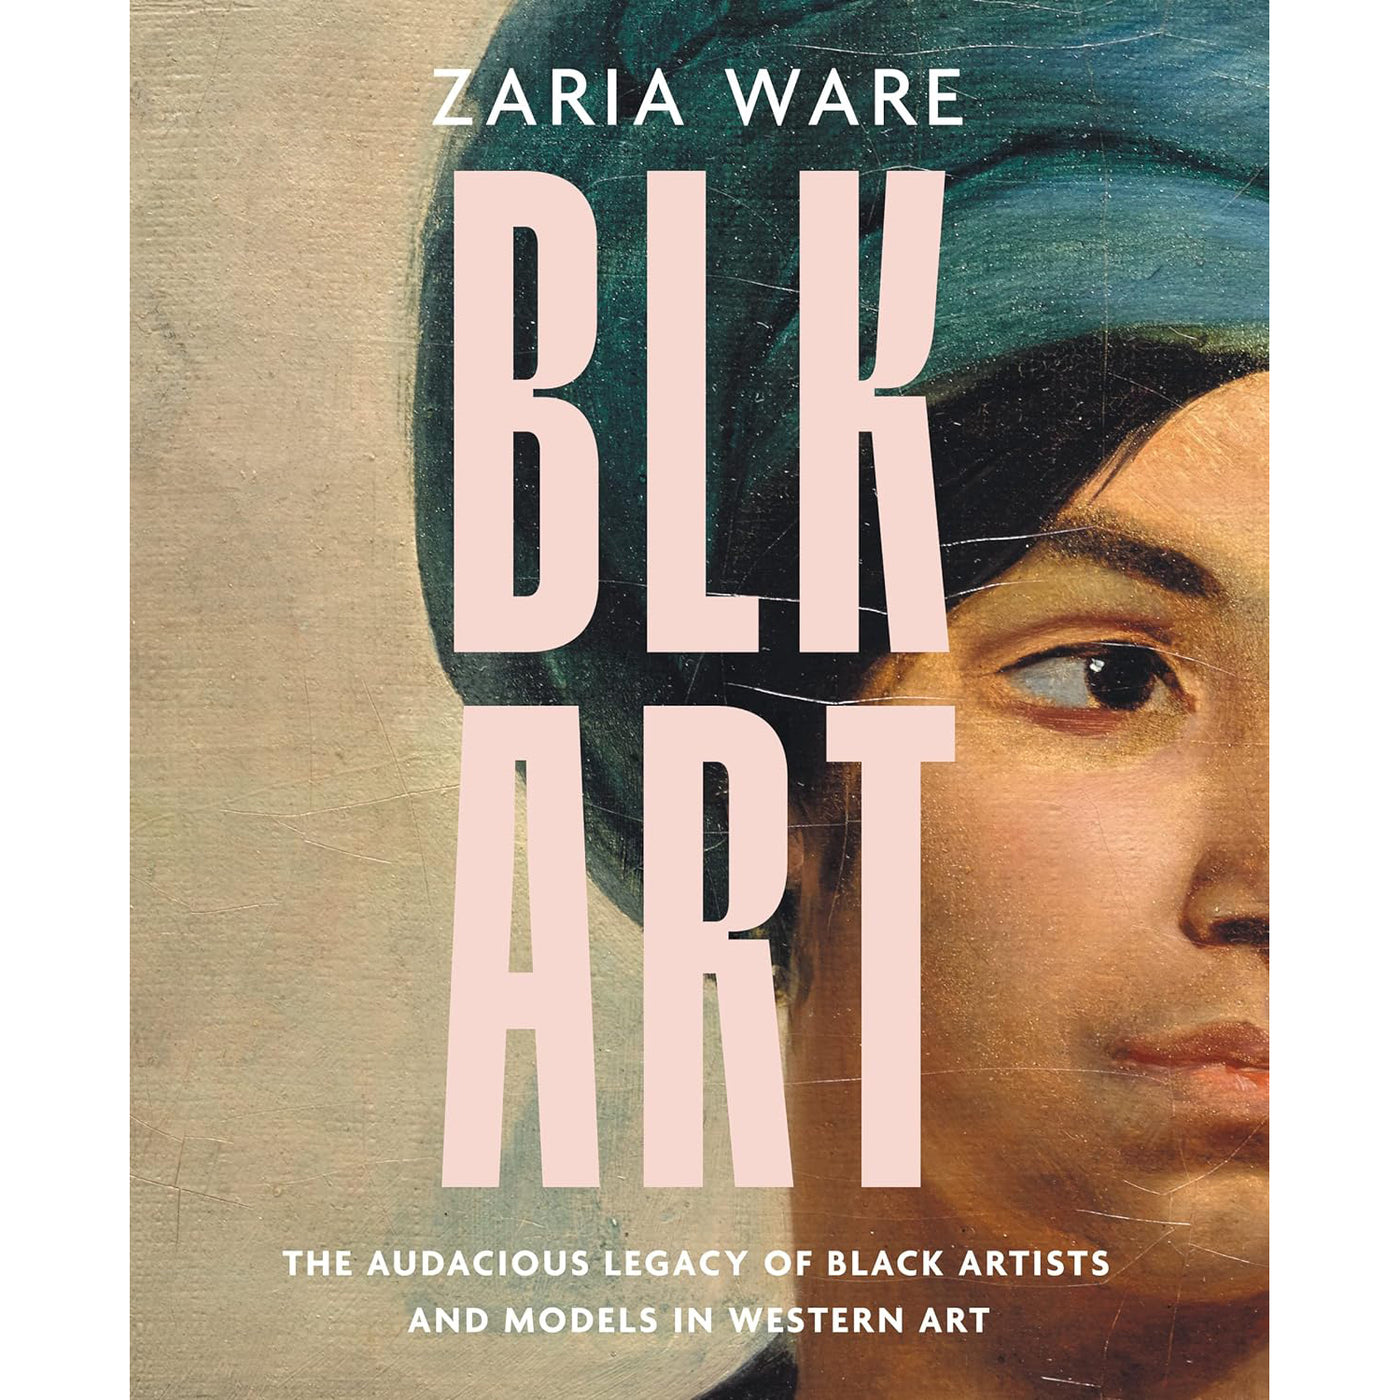 BLK ART: The Audacious Legacy of Black Artists and Models in Western Art